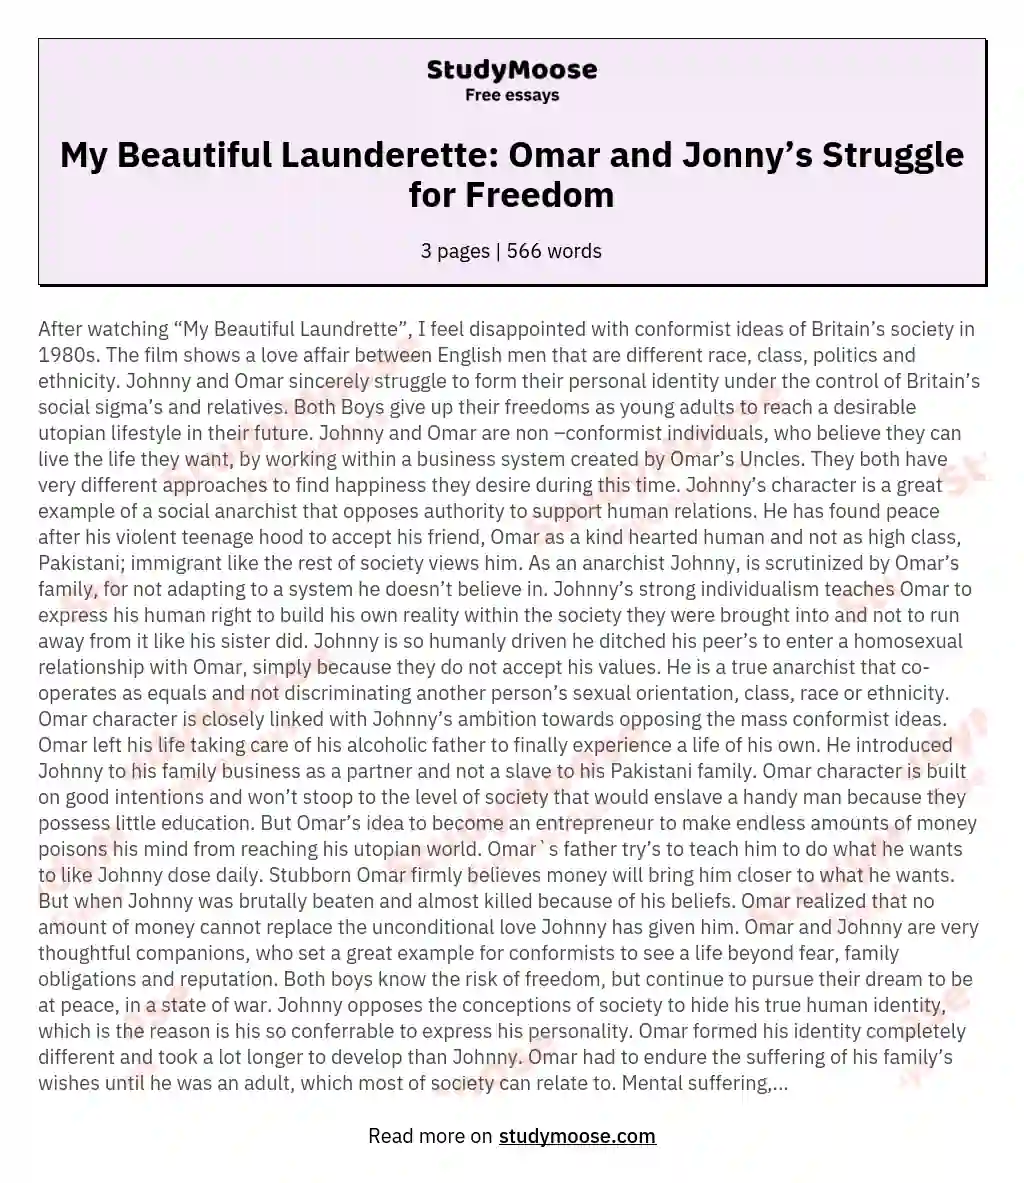 My Beautiful Launderette: Omar and Jonny’s Struggle for Freedom essay